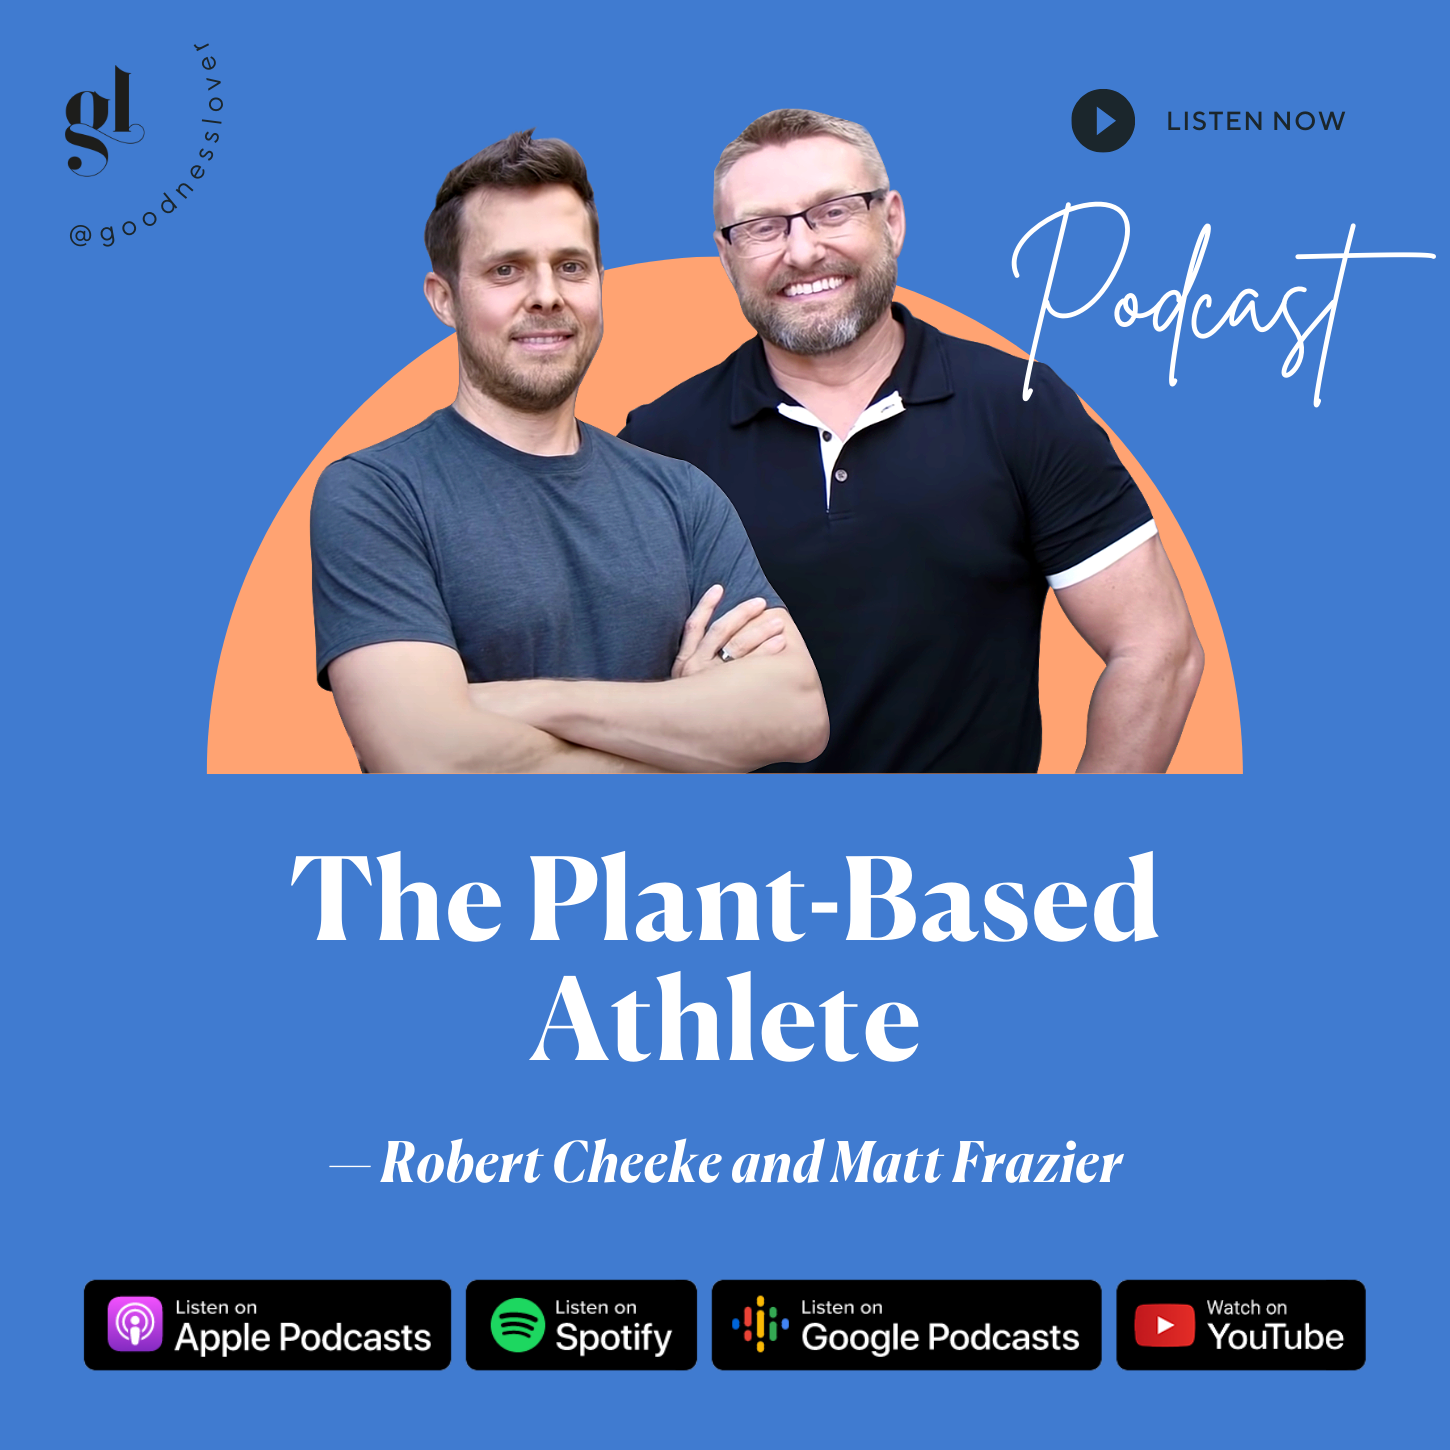 How to Gain Muscle on a Plant-Based Diet | Robert Cheeke and Matt Frazier